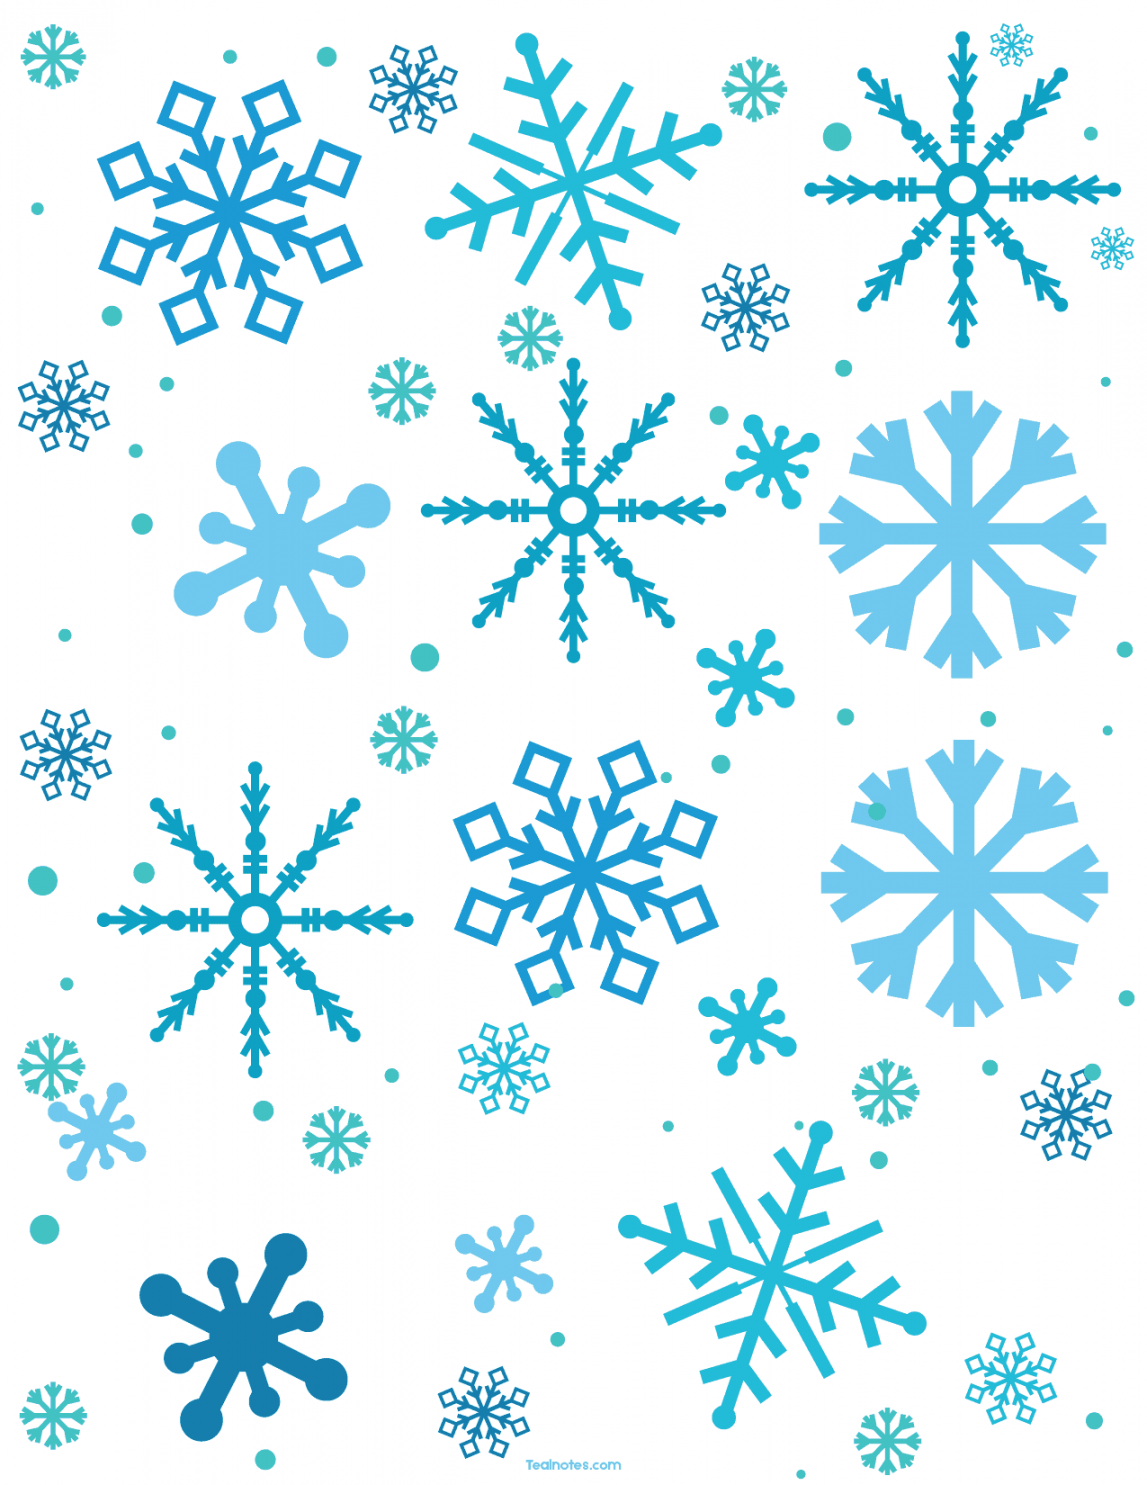 Free Snowflake Template: Easy Paper Snowflakes To Cut And Color - FREE Printables - Snowflake Printable Free